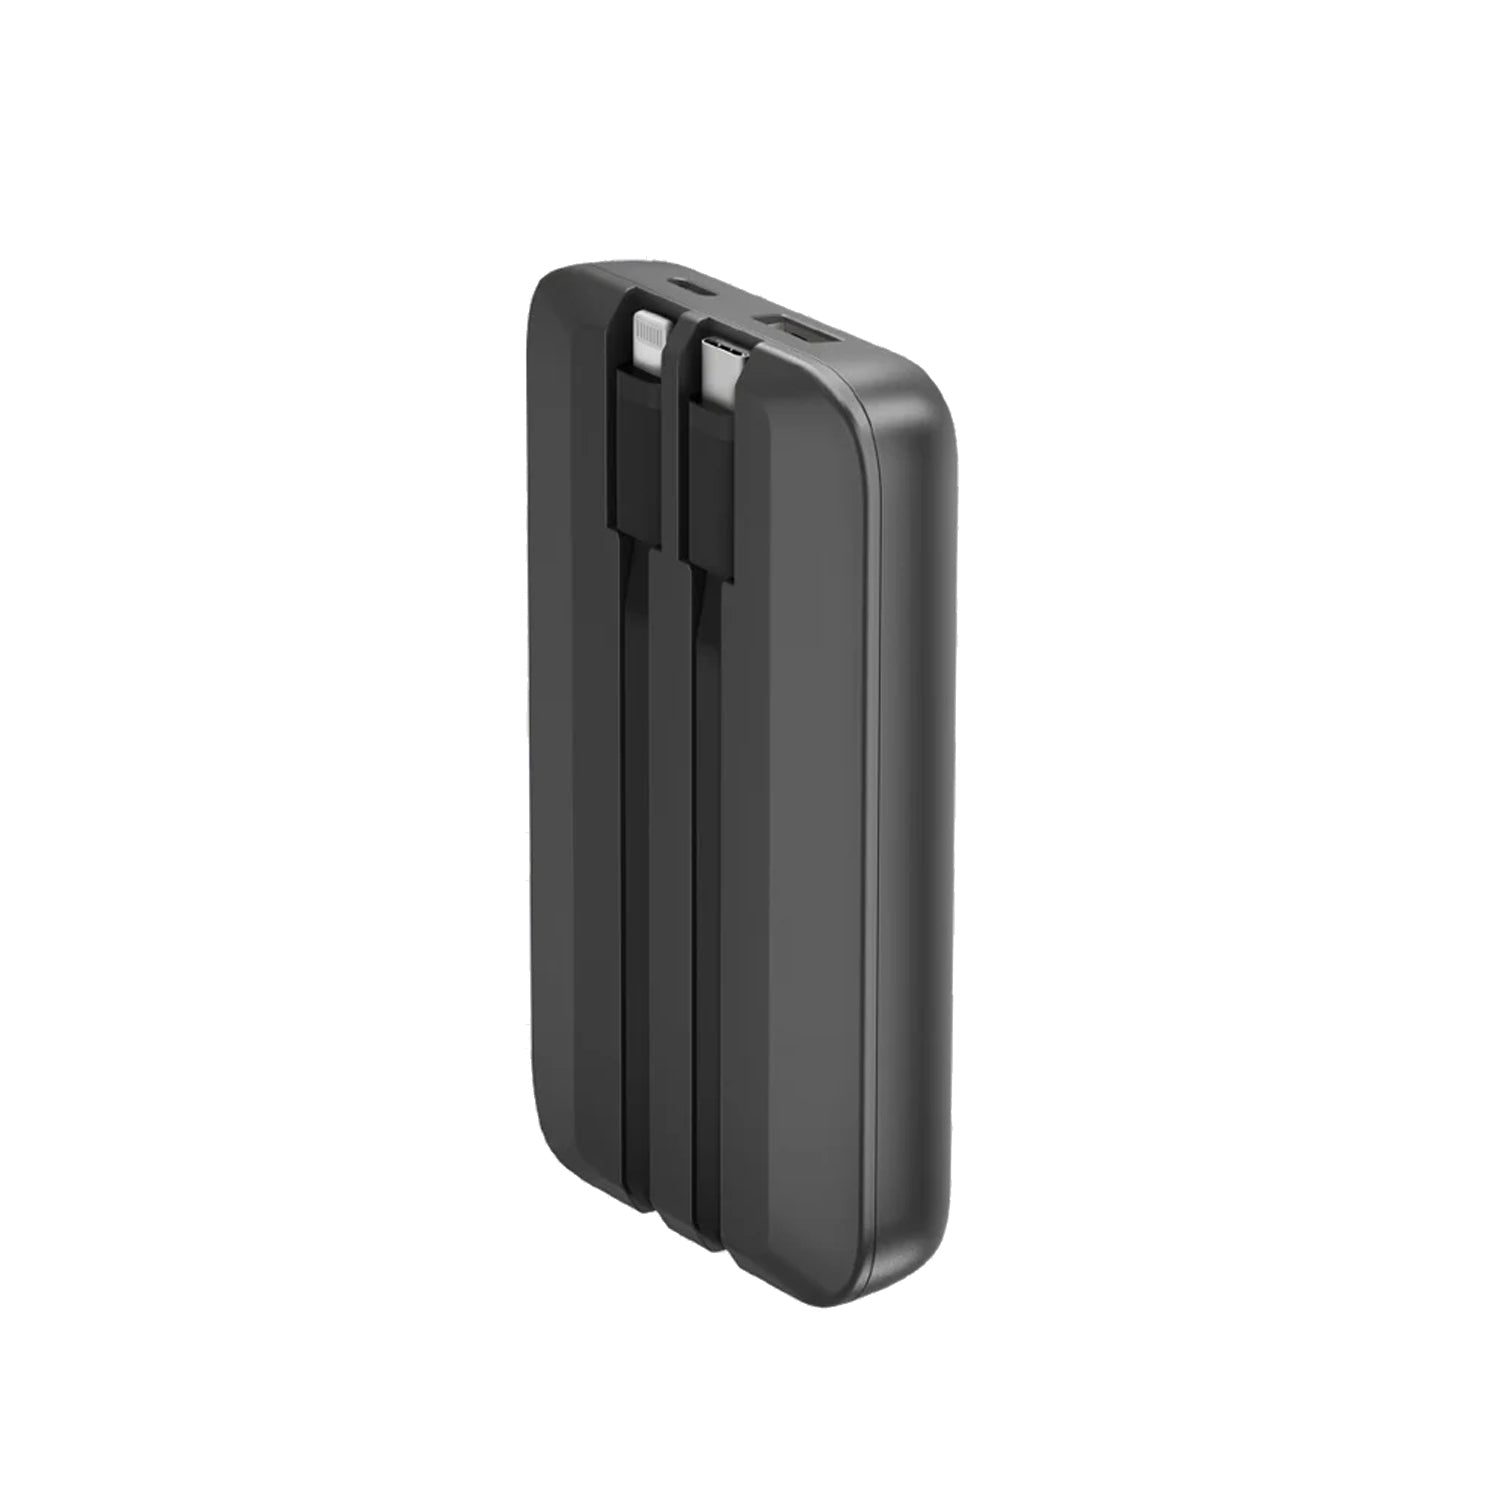 Energea Integra Duo 10,000 mAh PowerBank with Built-In Lightning & USB Type-C Cables